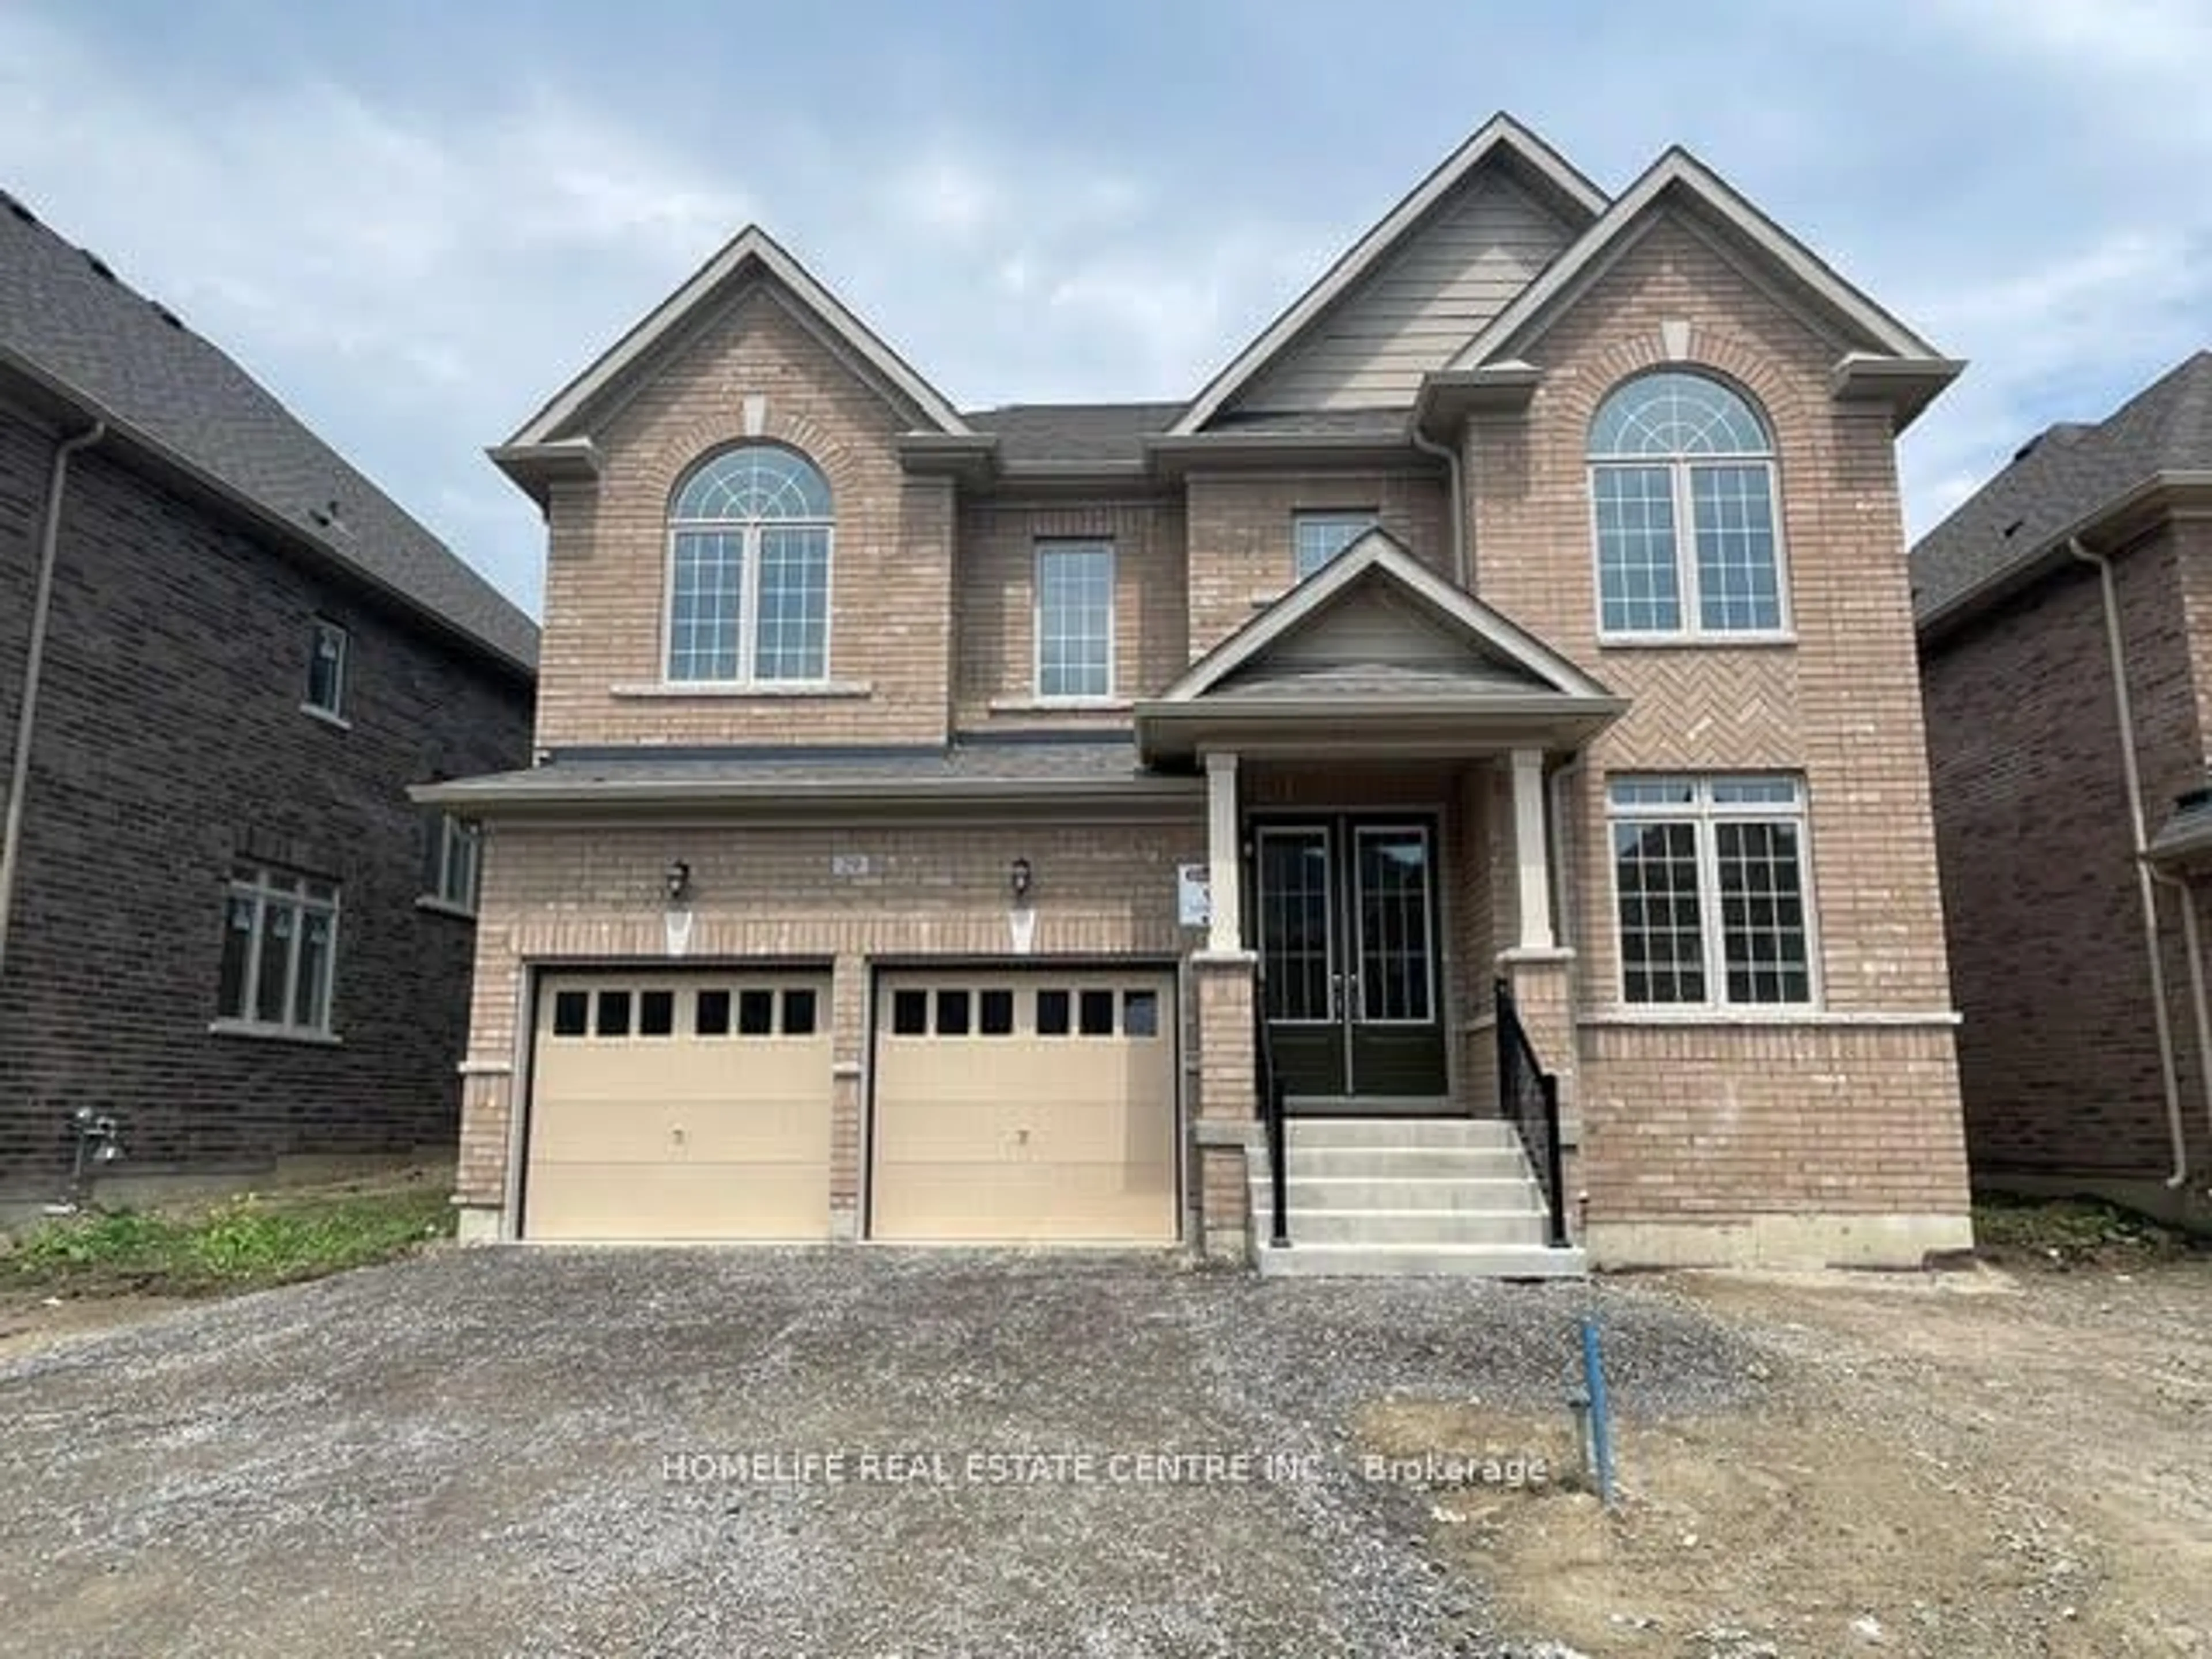 Home with brick exterior material for 29 Claremont Dr, Brampton Ontario L6R 0B8